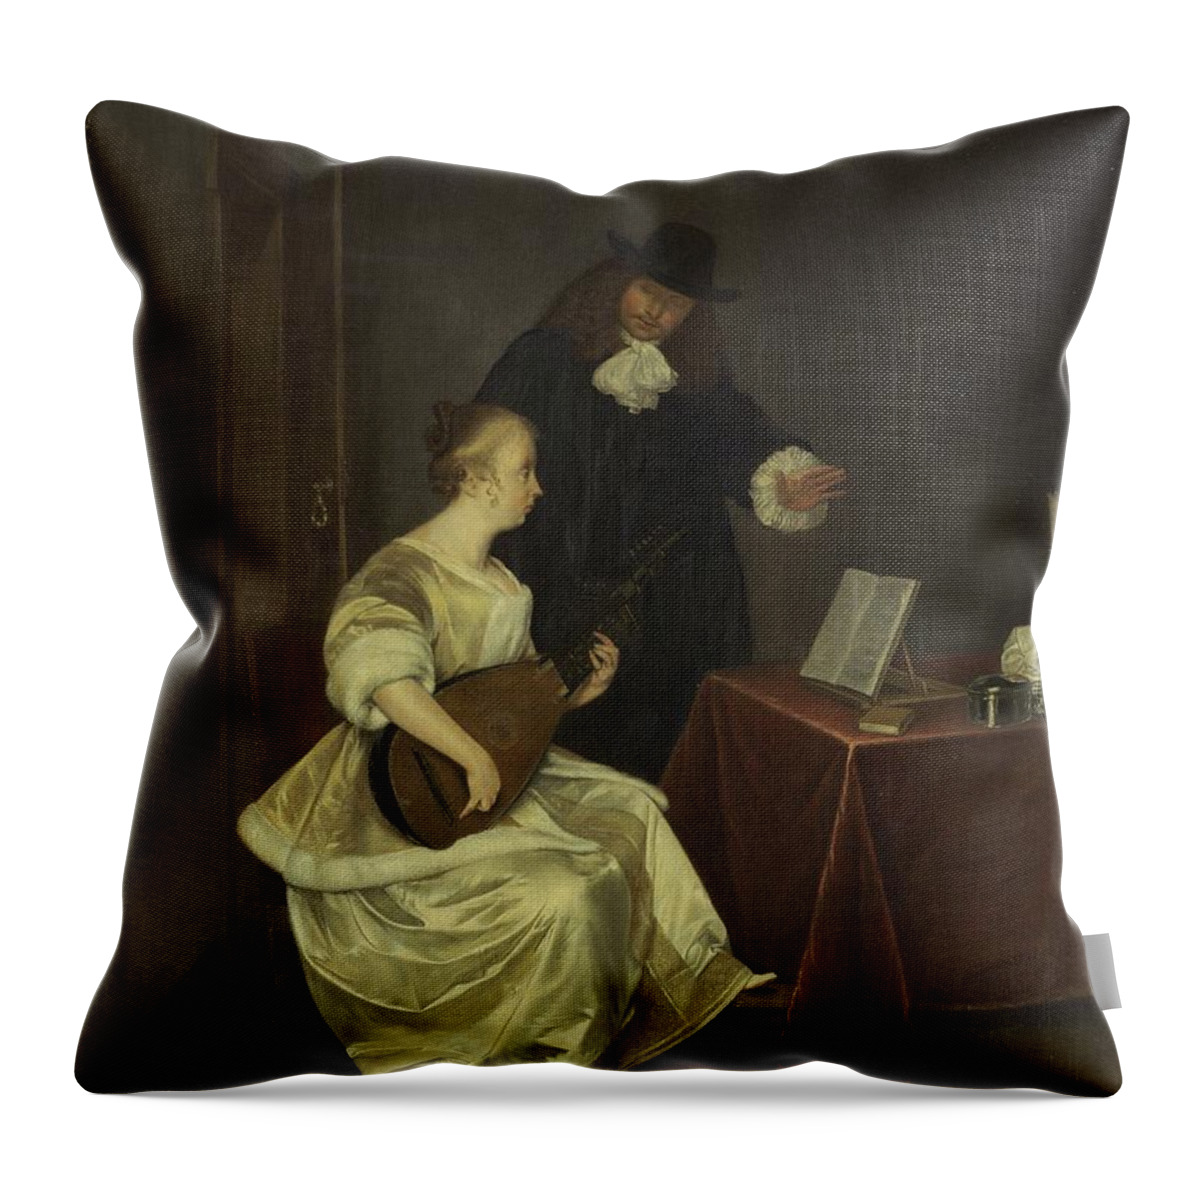 Woman Throw Pillow featuring the painting The Music Lesson by Studio Of Gerard Ter Borch The Younger